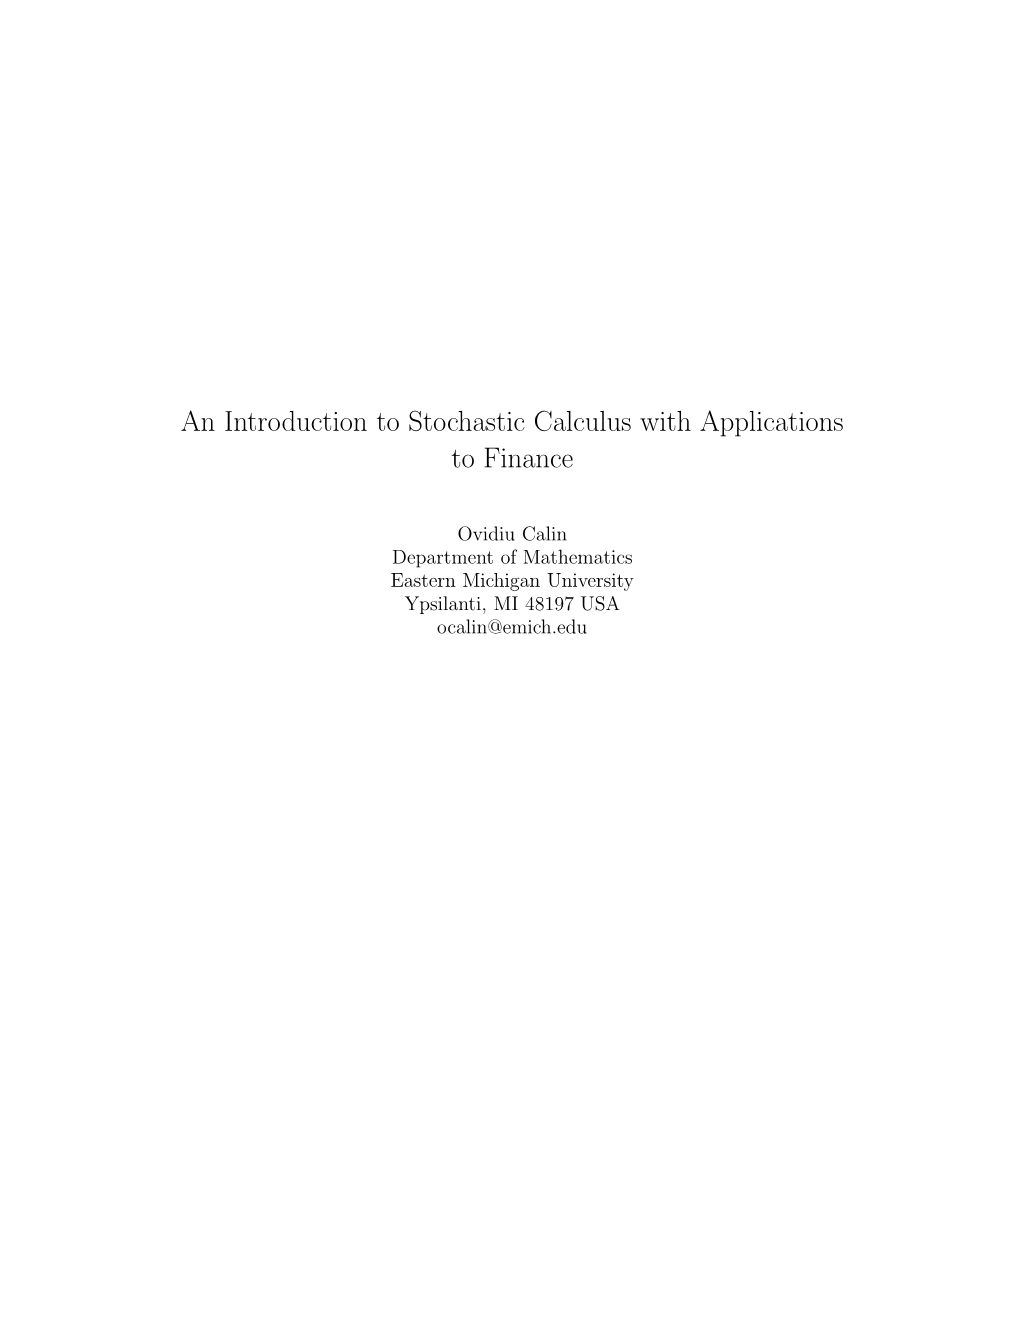 An Introduction to Stochastic Calculus with Applications to Finance